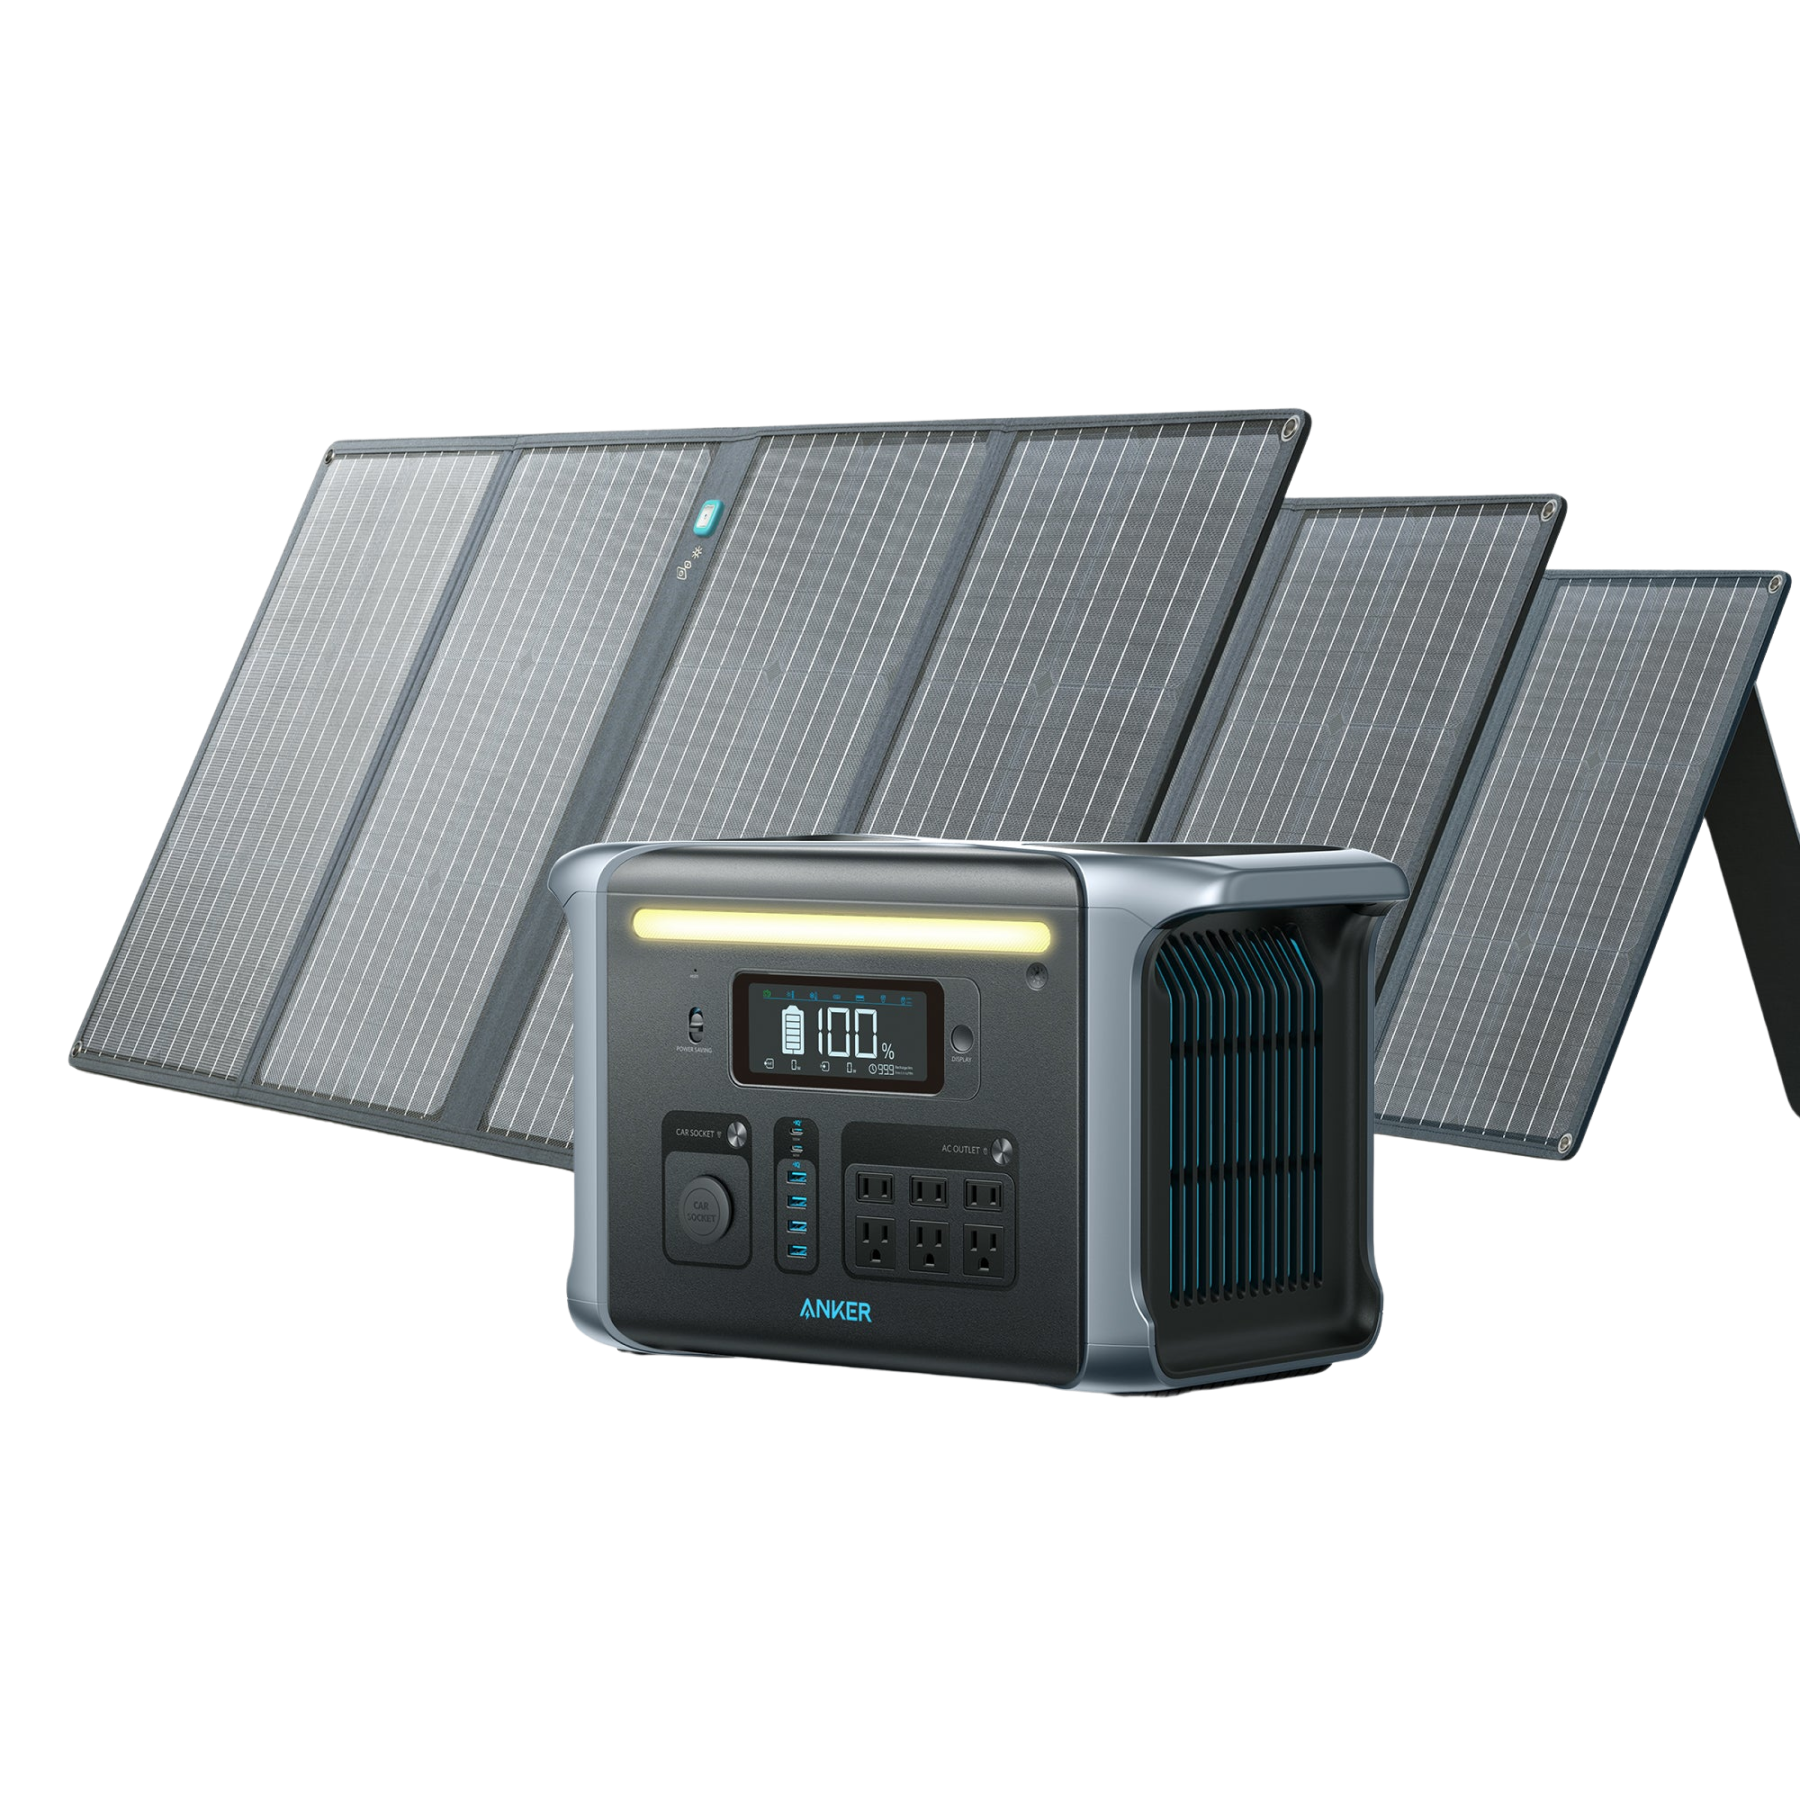 Anker SOLIX Solar Generator 757 (PowerHouse 1229Wh with 3x 100W Solar Panel) All Components